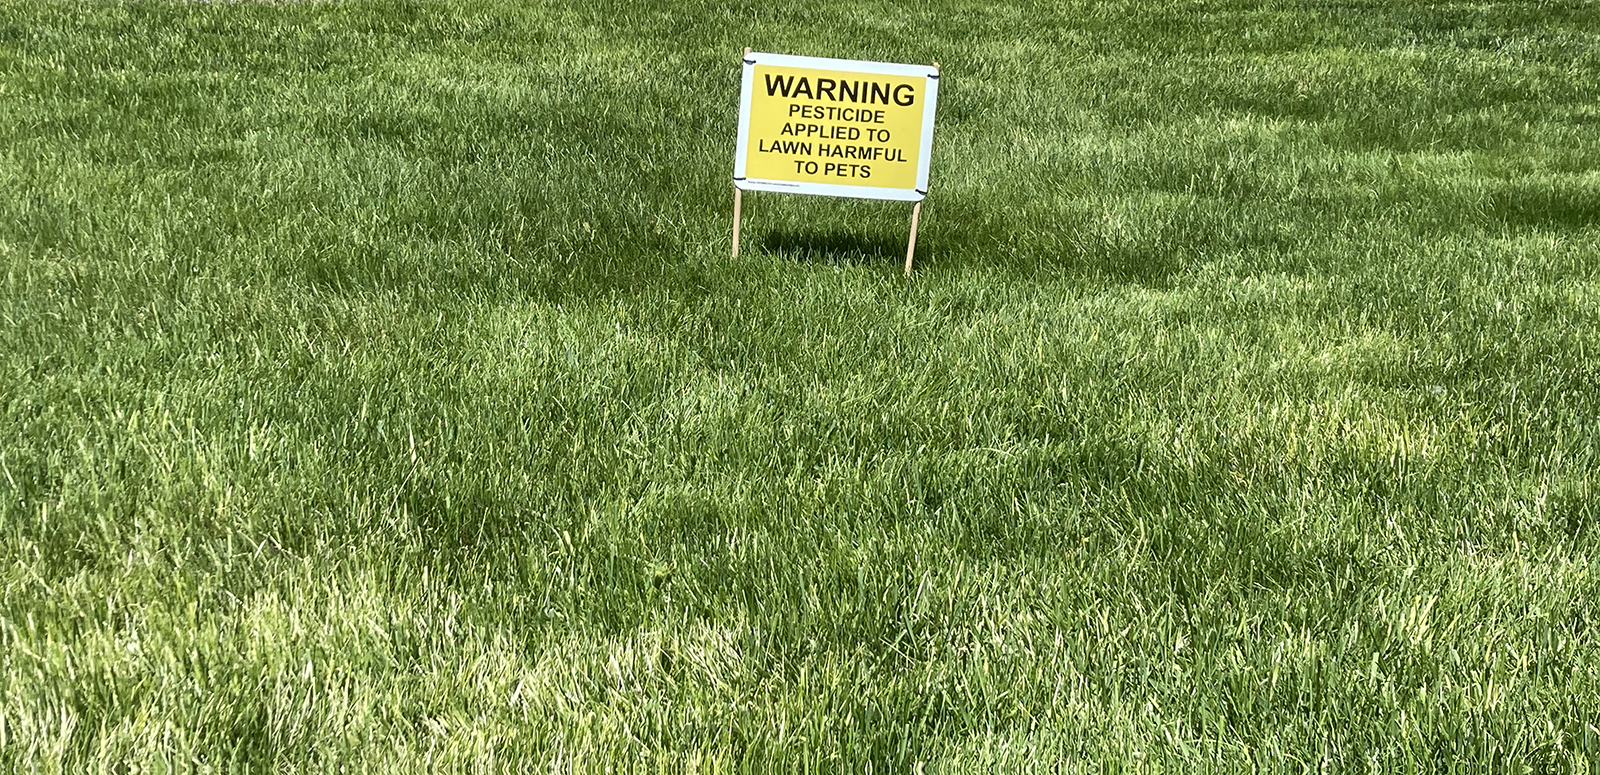 Lawn Chemical sign